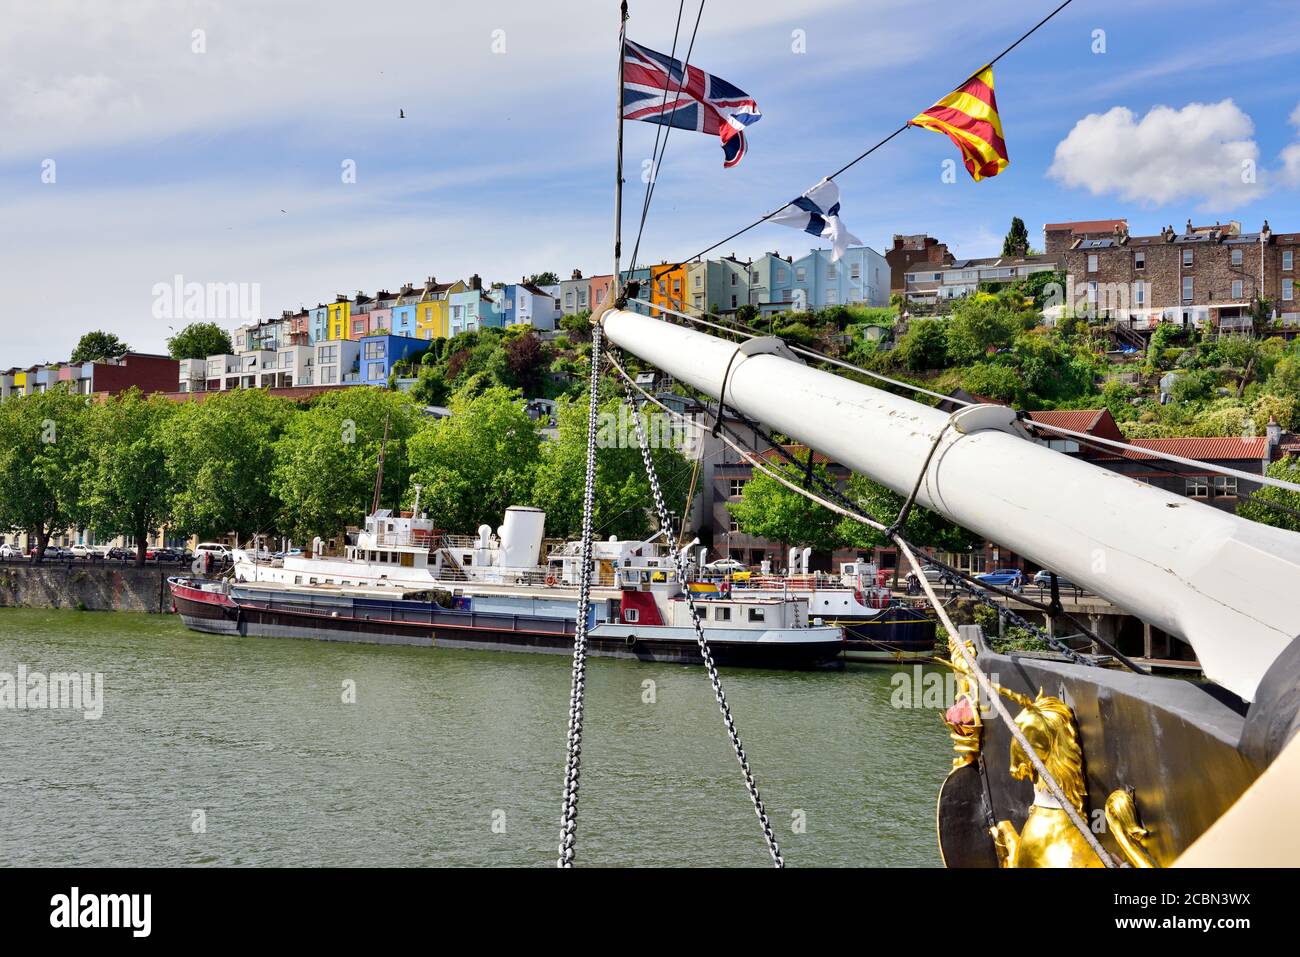 On deck, bow of the Brunel's SS Great Britain historic steam ship in Great Western Dockyard in Bristol looking toward houses on hill in Clifton Wood Stock Photo